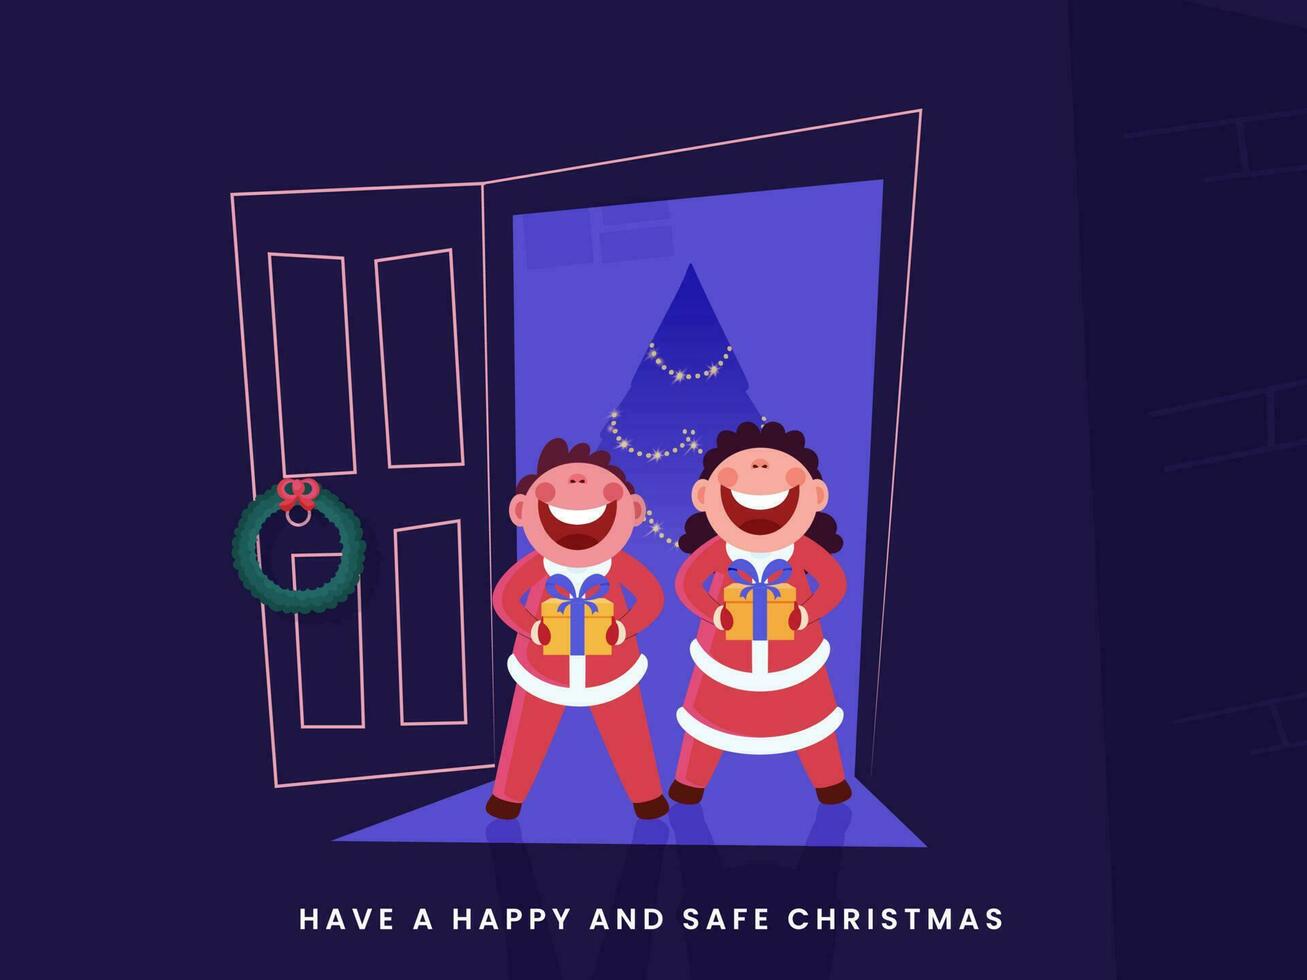 Cheerful Kids Holding Gift Box At Door With Decorative Xmas Tree For Happy and Safe Christmas Celebrate. vector